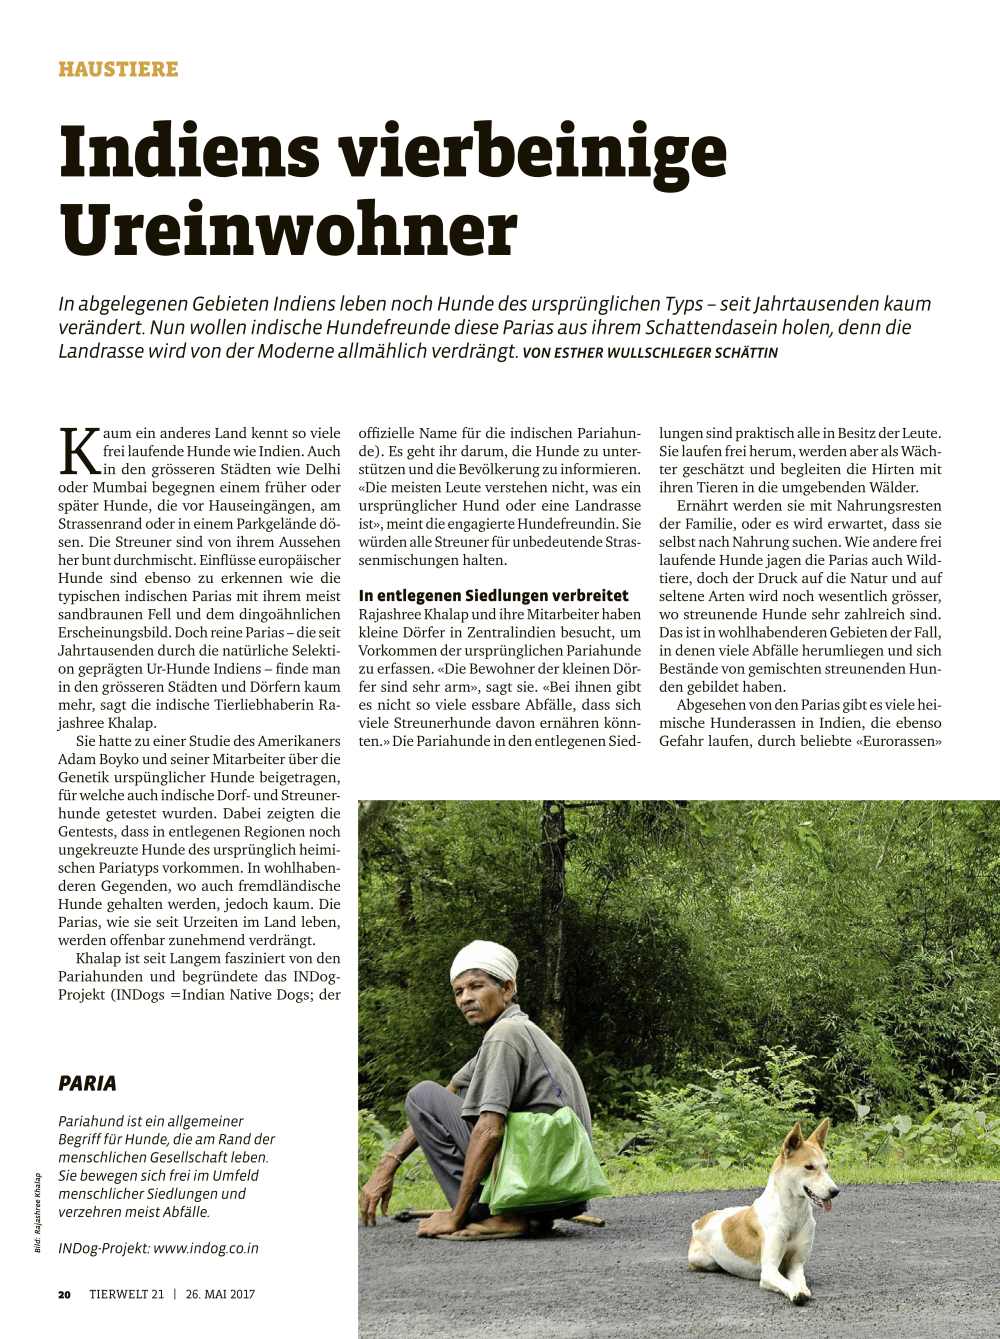 Esther Wullschleger Article on INDogs for Tierwelt